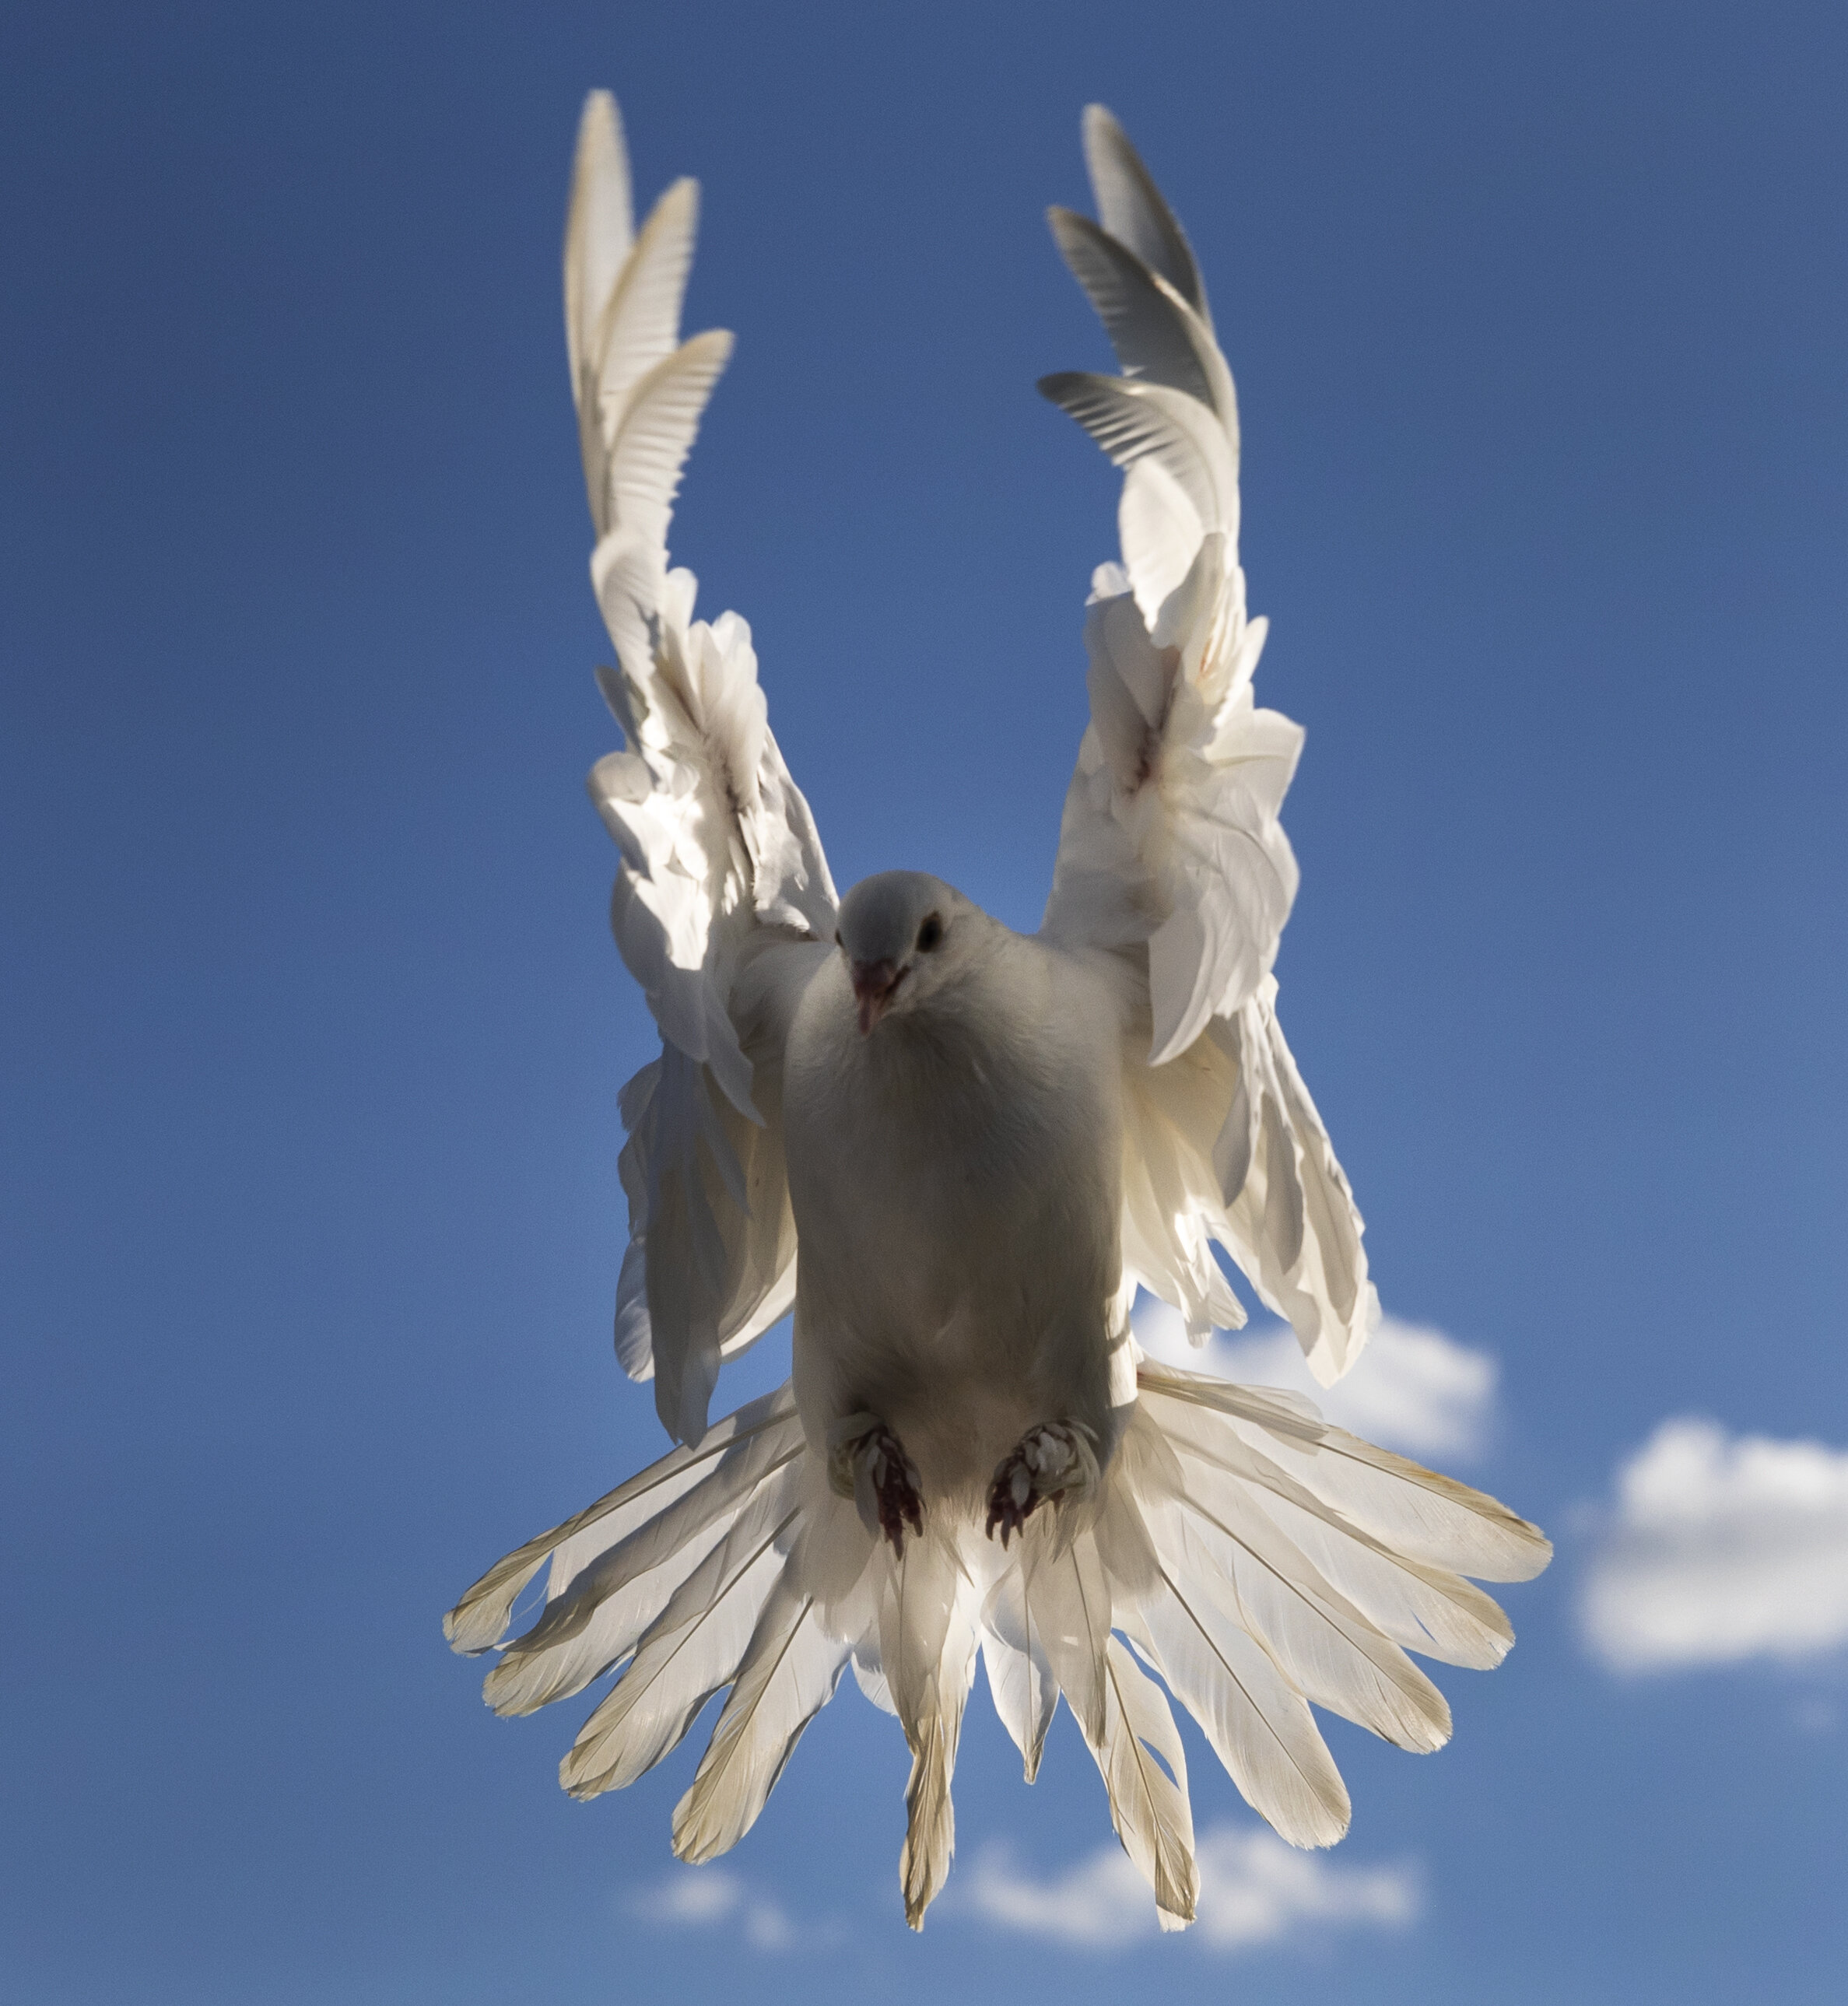  A Ukrainian Skycutter, a breed of pigeons, takes flight from the back of a pickup truck owned by trainer Hasan Kahali at Oak Lake Park on Friday, July 31, 2020. KENNETH FERRIERA, Journal Star. Khalil started training pigeons when he was a refugee in